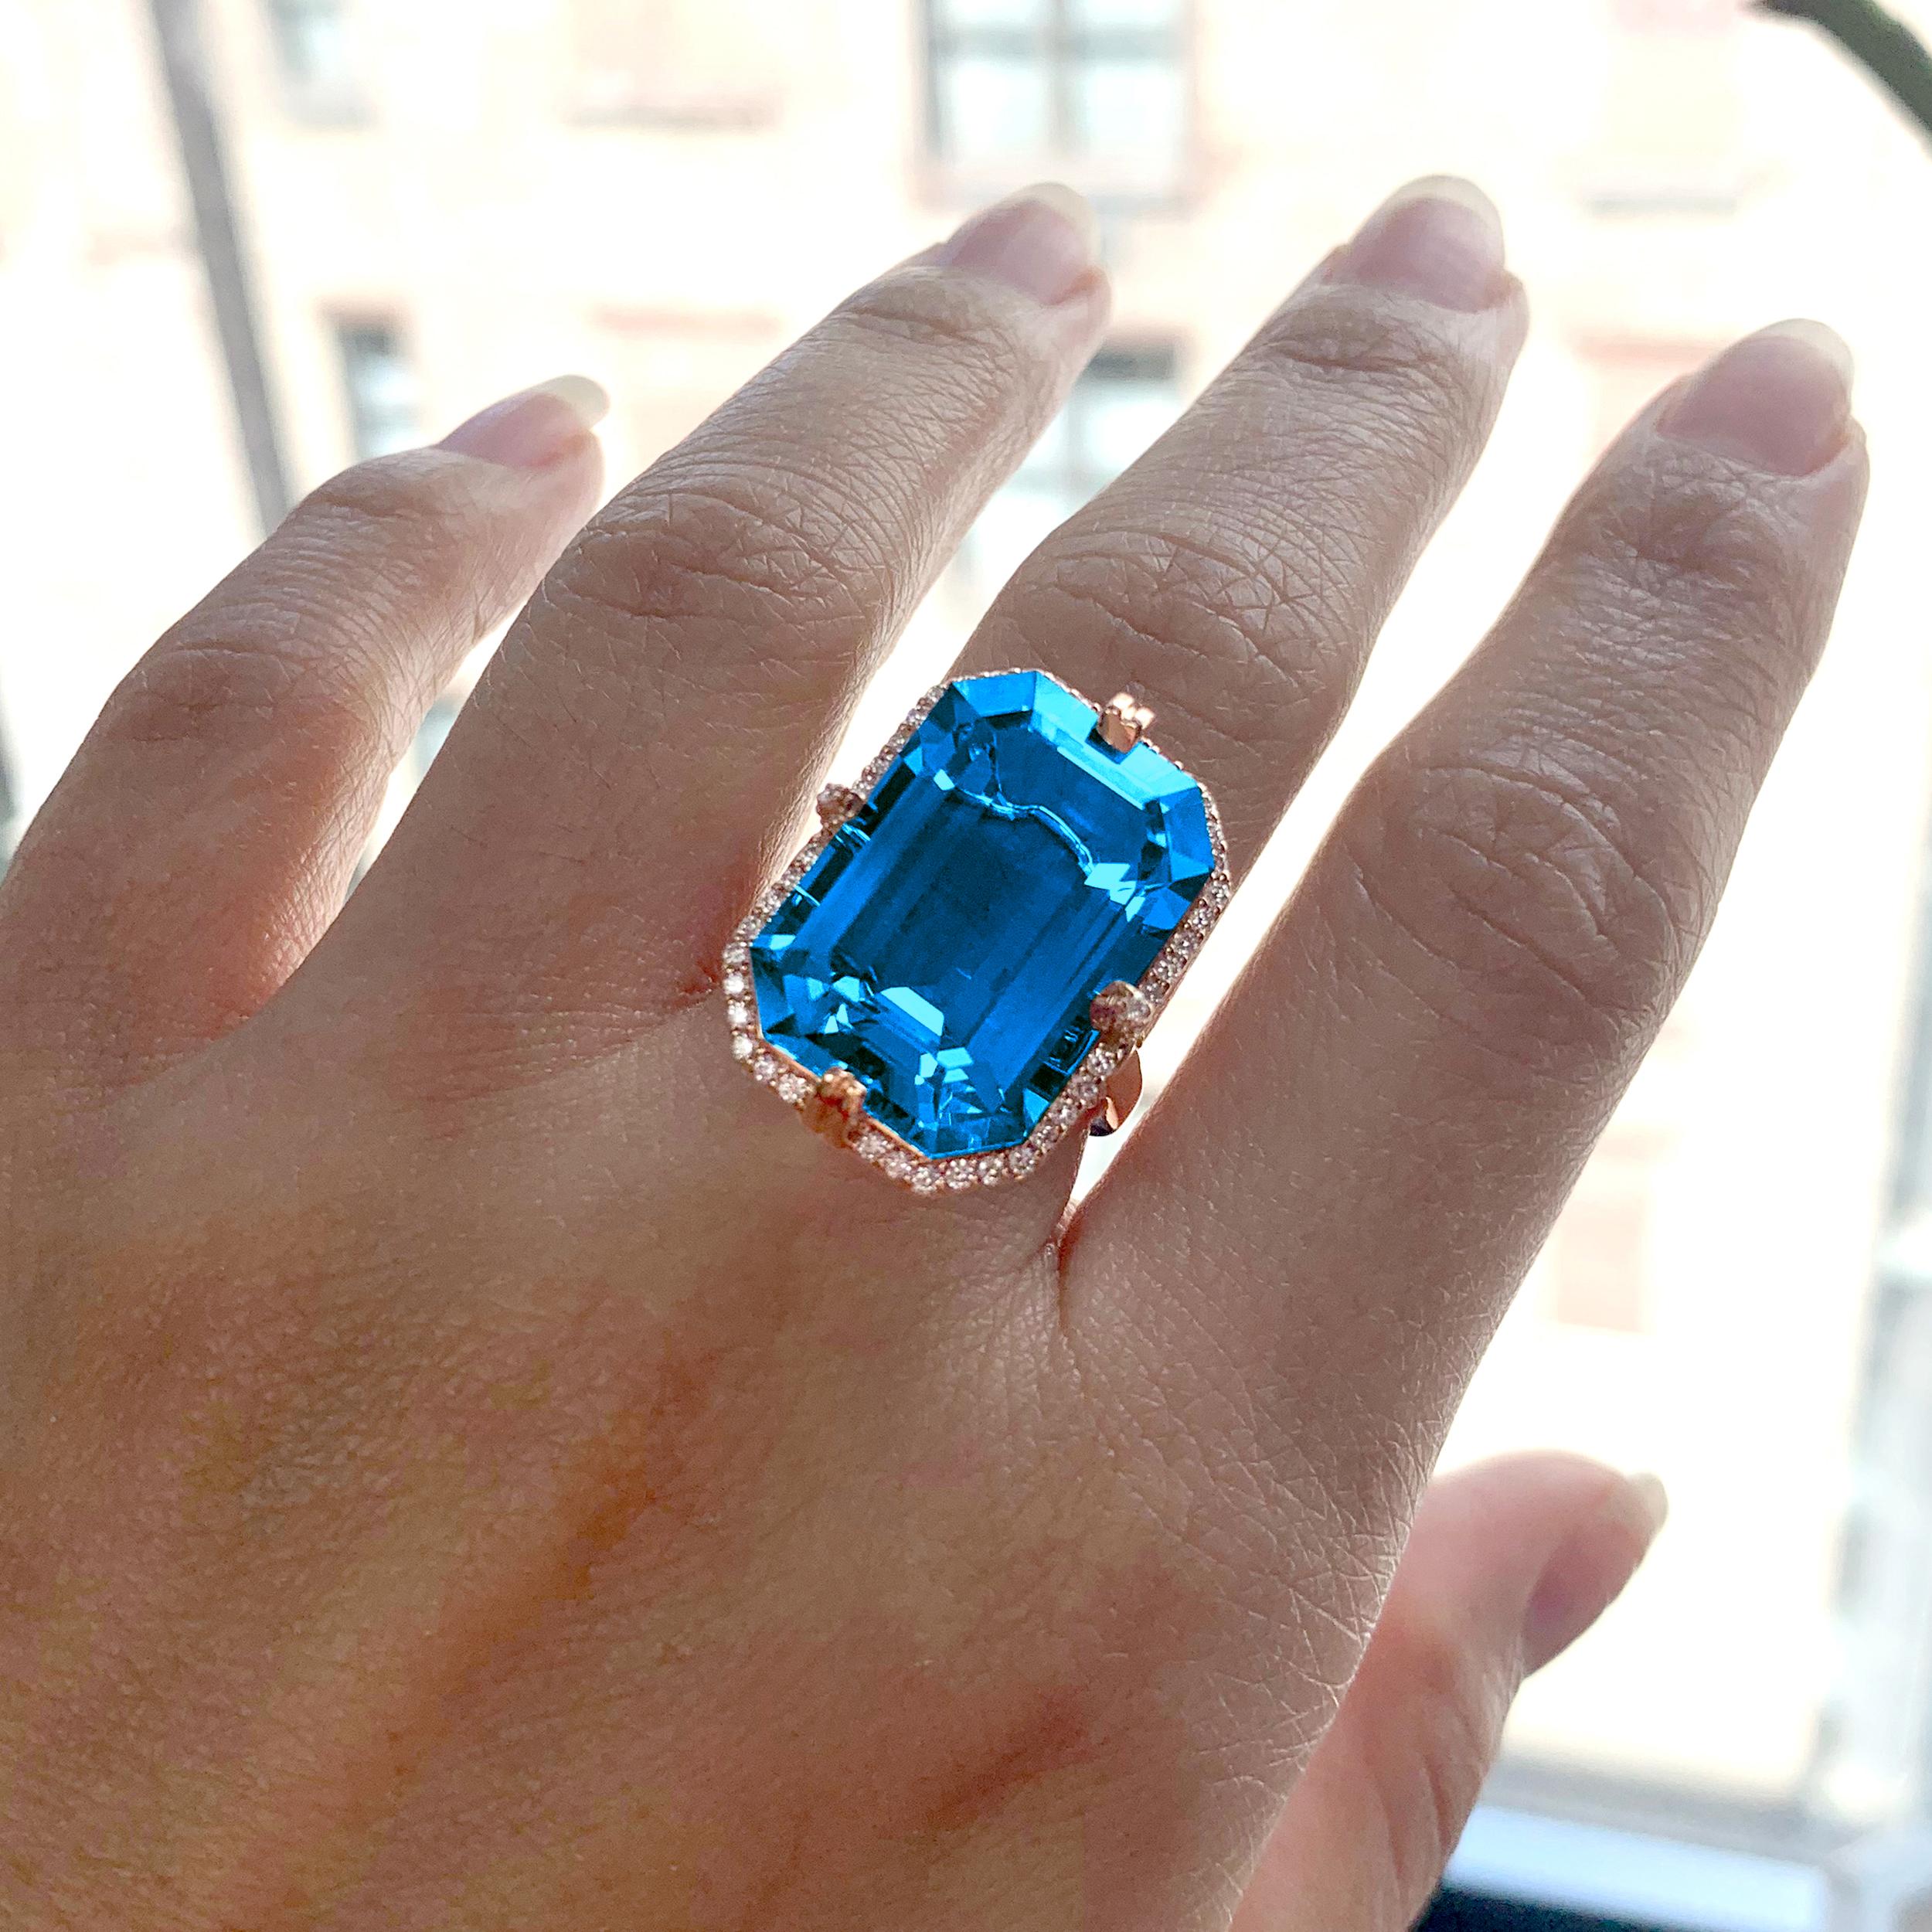 London Blue Topaz Emerald Cut Ring with Diamonds in 18K Yellow Gold, From 'Gossip' Collection

Stone Size: 20 x 14 mm 

Gemstone Approx Wt: London Blue Topaz - 21.66 Carats

Diamonds: G-H / VS, Approx Wt: 0.41 Carats